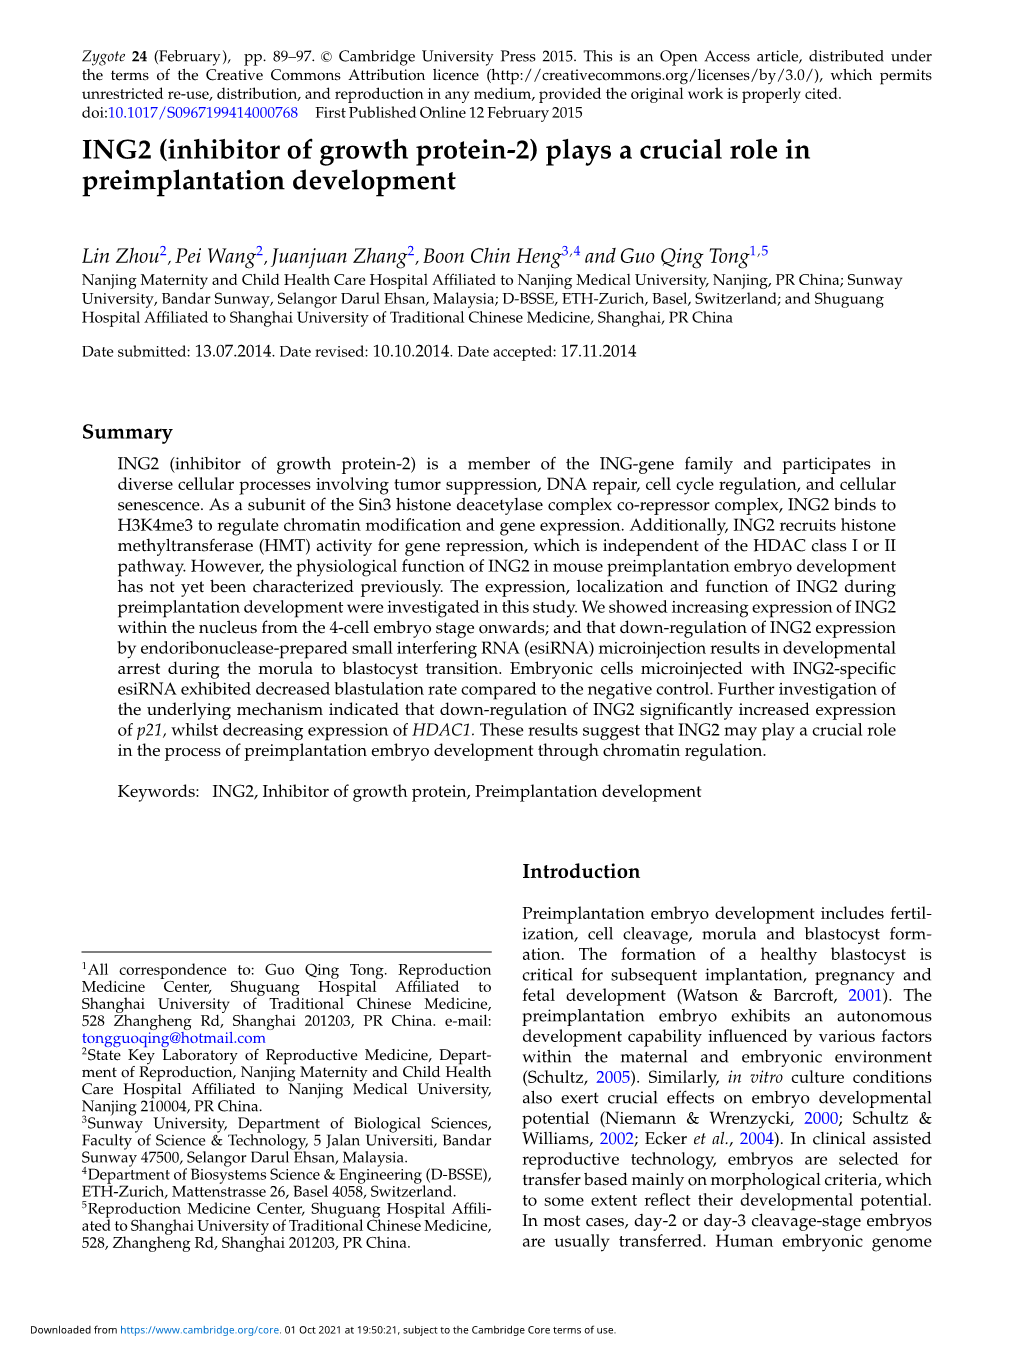 ING2 (Inhibitor of Growth Protein-2) Plays a Crucial Role in Preimplantation Development